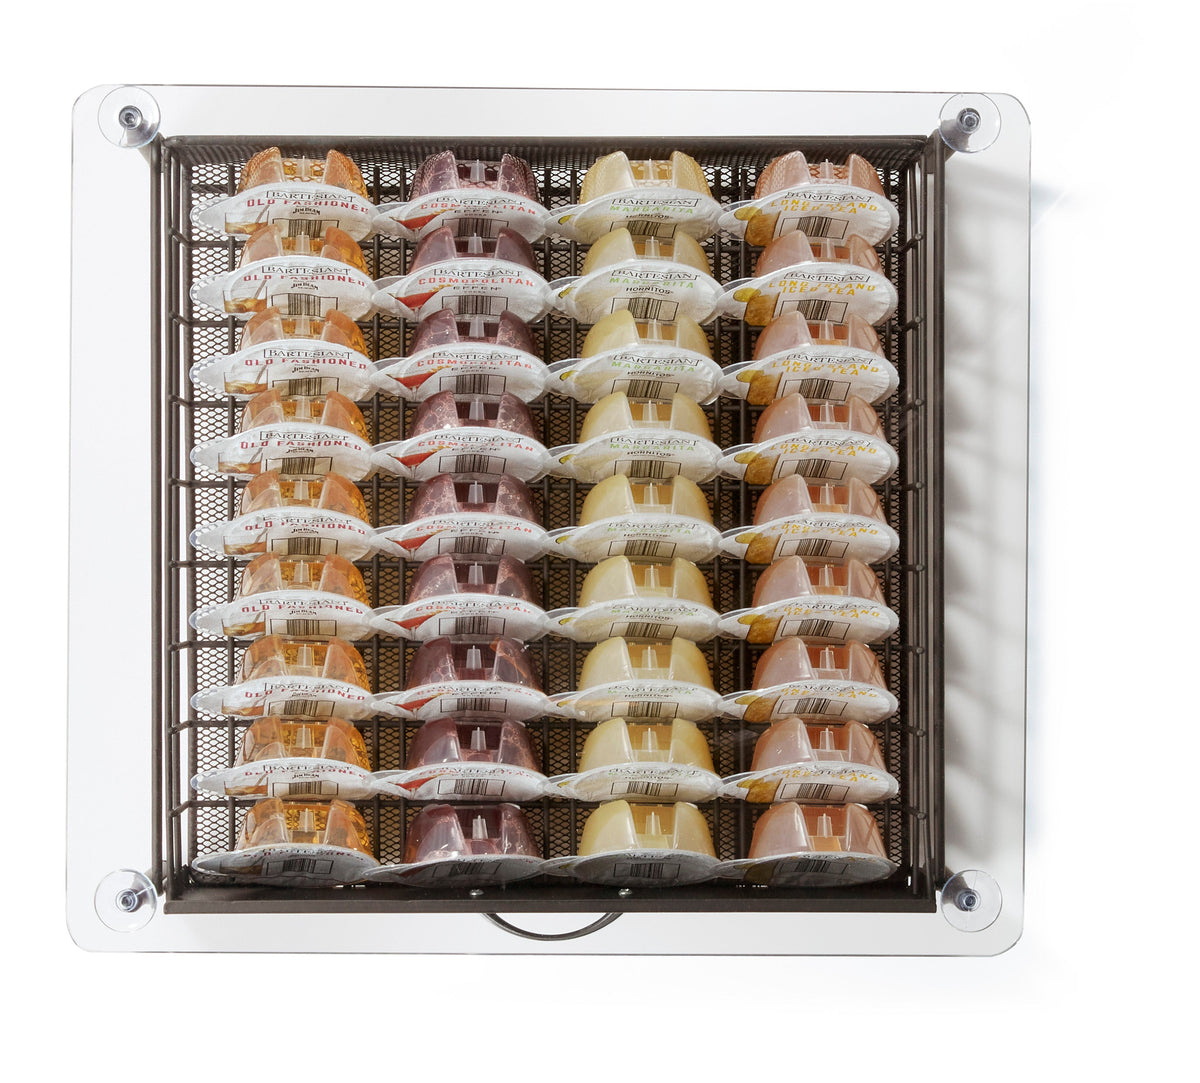 Premium Storage Drawer for Bartesian Capsules by Ksestor - Holds up to 40  Bartesian Pods - Sturdy and Stackable Bartesian Pod Holder - Bartesian 